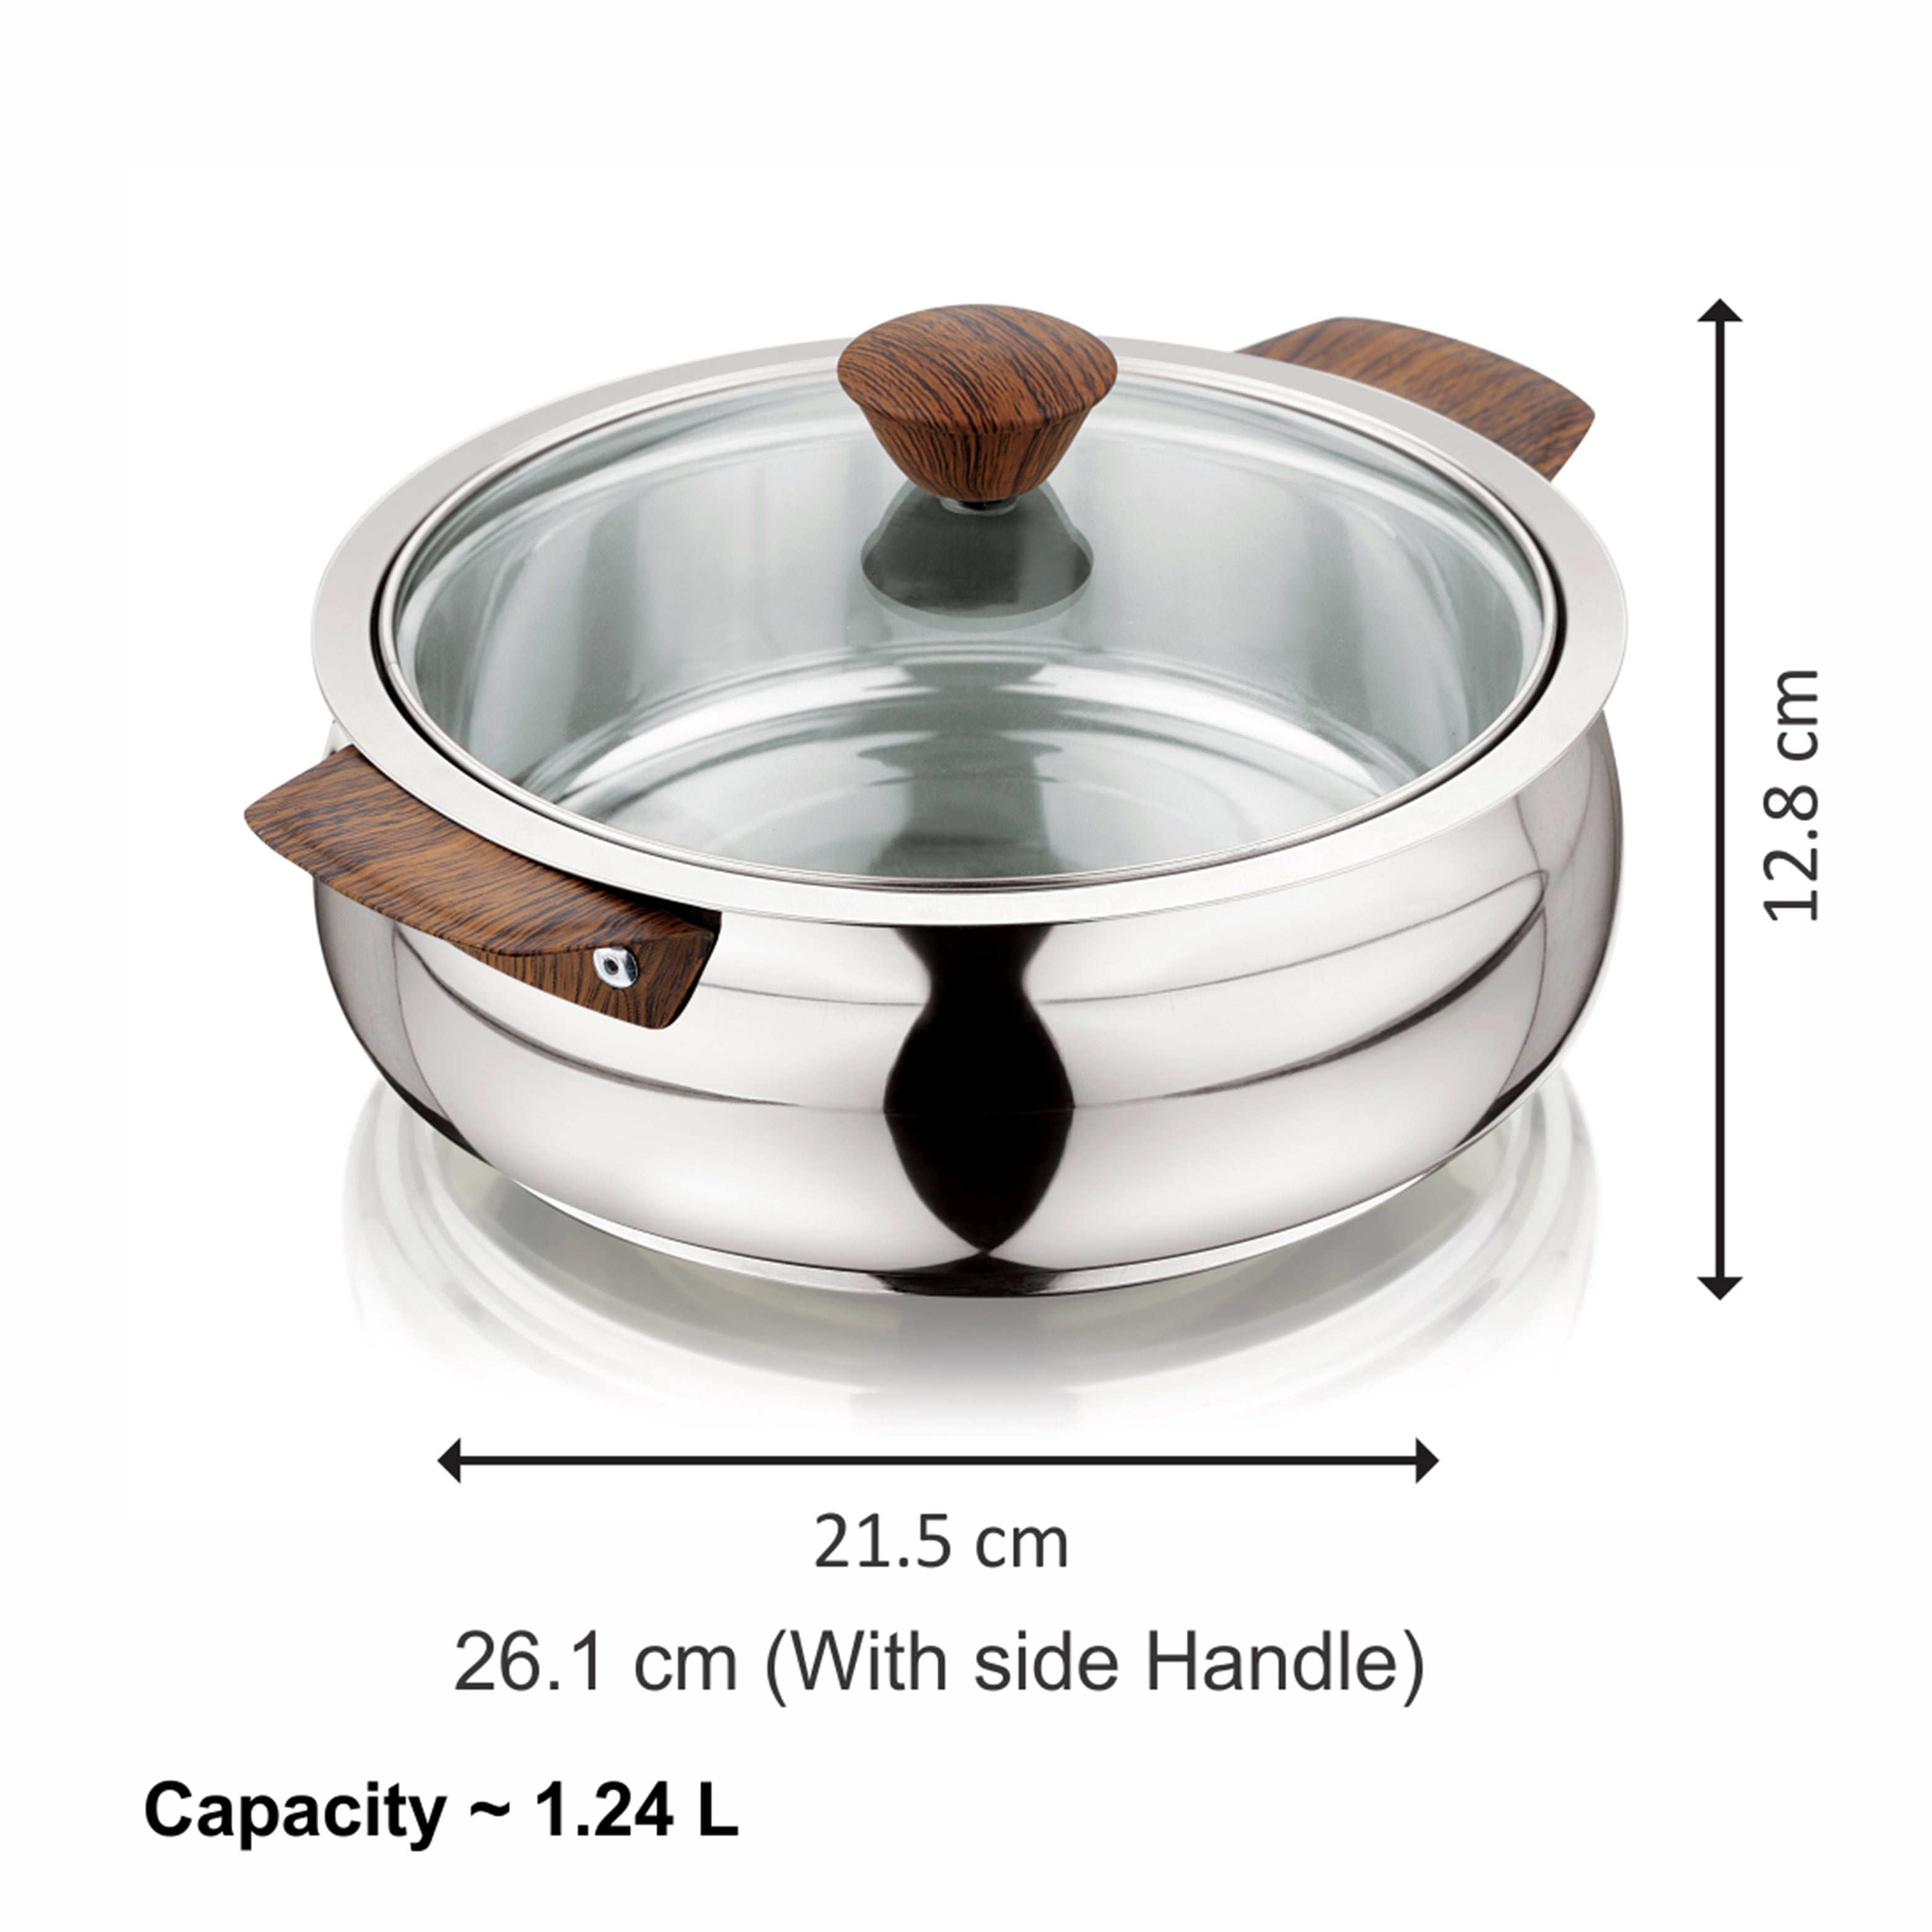 NanoNine Royal Serve Double Wall Insulated Stainless Steel Casserole with Glass Lid.